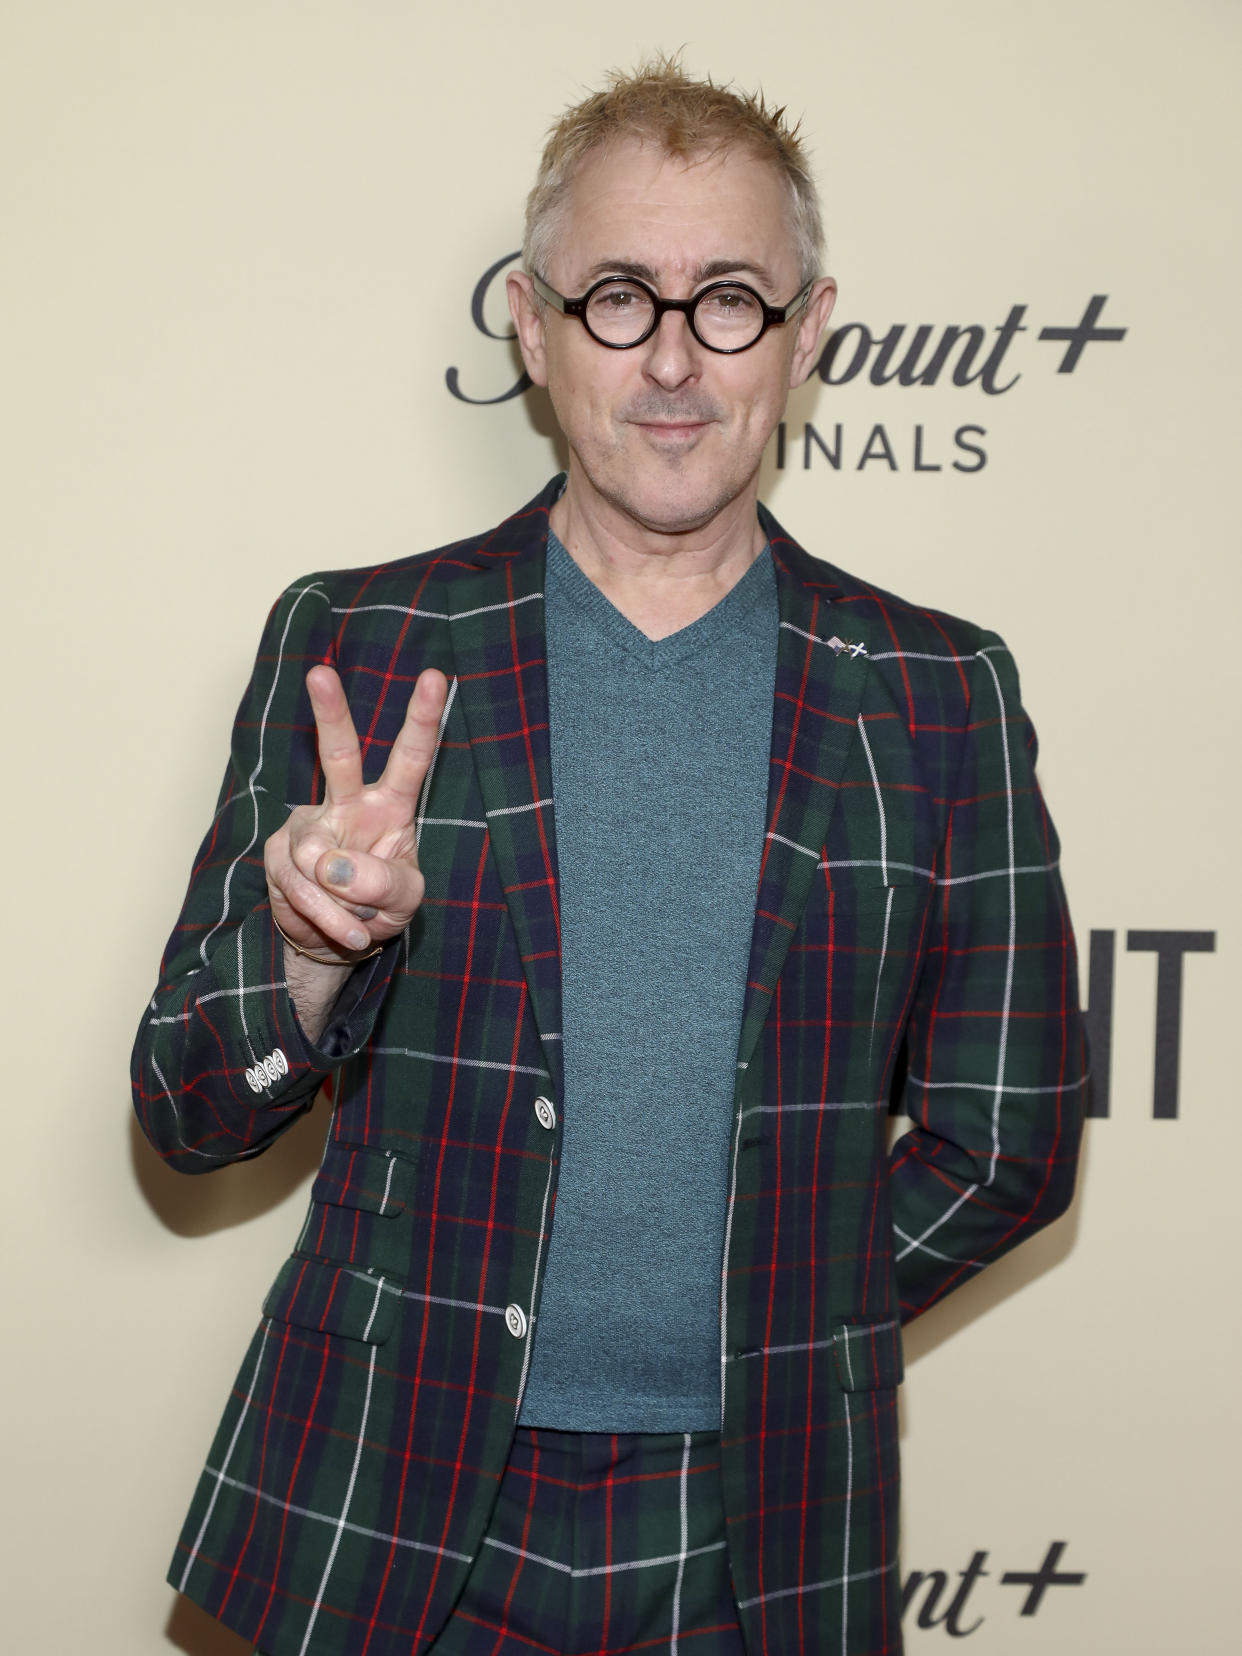 FILE - Alan Cumming attends the Paramount+ series finale premiere for "The Good Fight" at the Museum of Art and Design Theater on Wednesday, Nov. 2, 2022, in New York. Jamie Lee Curtis is this year's recipient of AARP The Magazine's Movies for Grownups Awards career achievement honor. The group announced Thursday that Curtis is receiving the honor at the AARP's annual Best Movies and TV for Grownups ceremony. The event is hosted by returning host Alan Cumming and is premiering on PBS on Feb. 17, 2023, at 9 p.m. E.T. (Photo by Andy Kropa/Invision/AP, File)